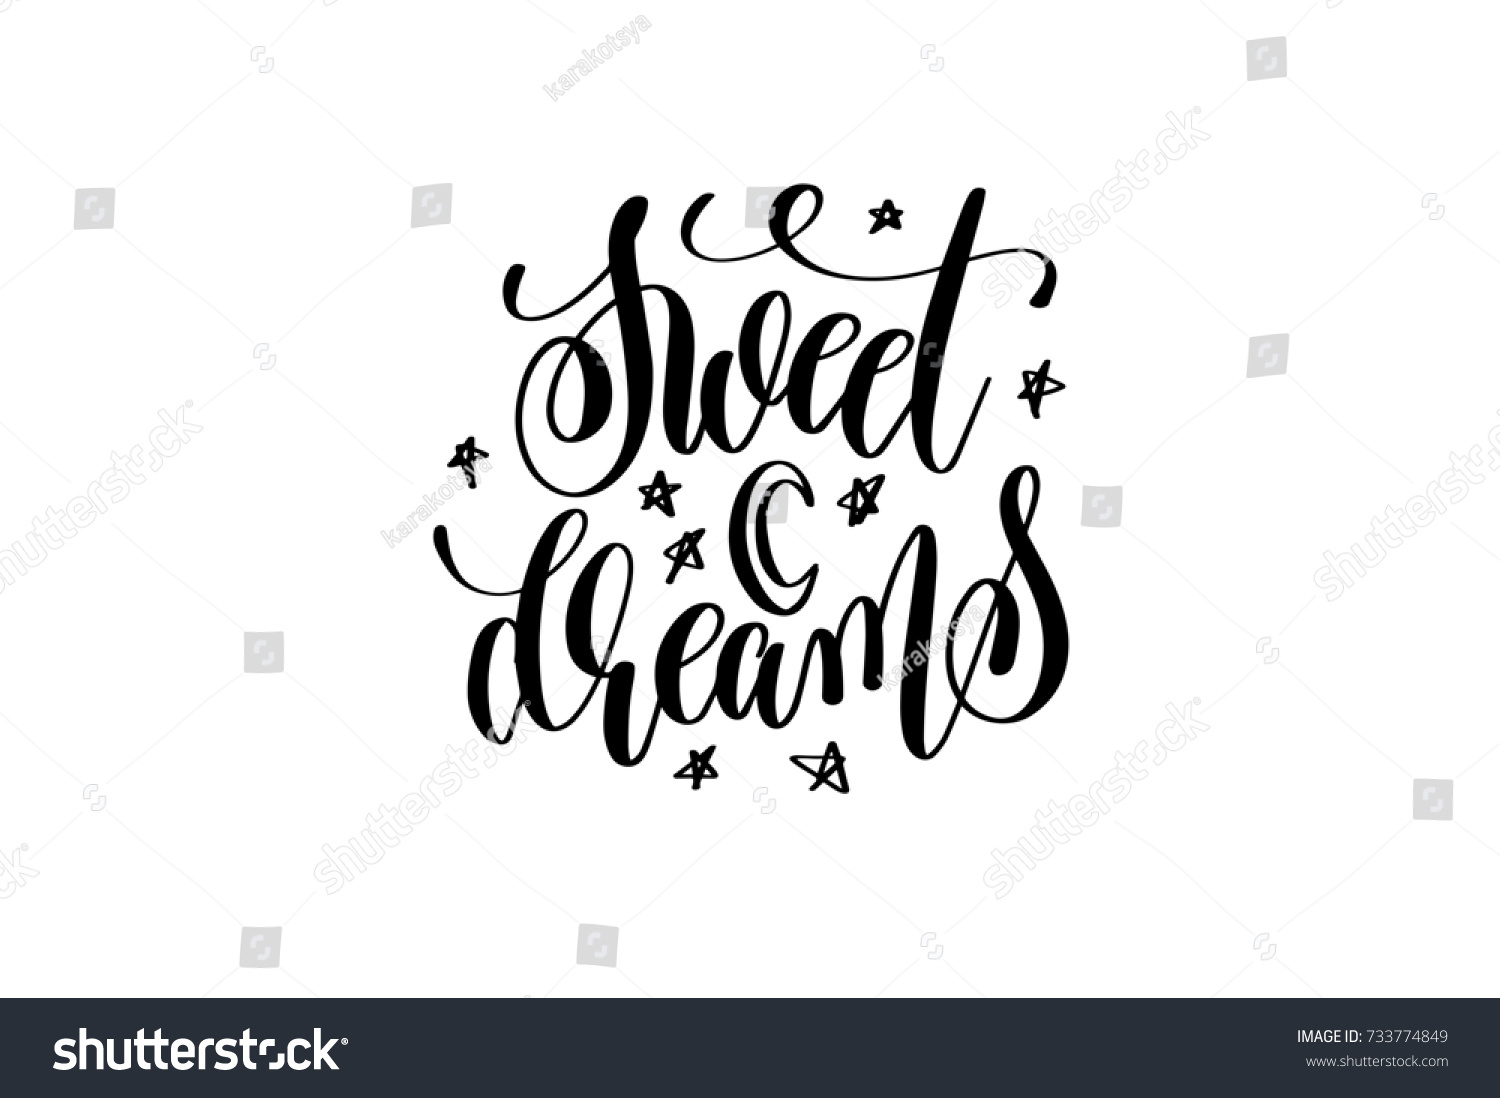 sweet dreams hand lettering inscription motivation and inspiration love and life positive quote calligraphy